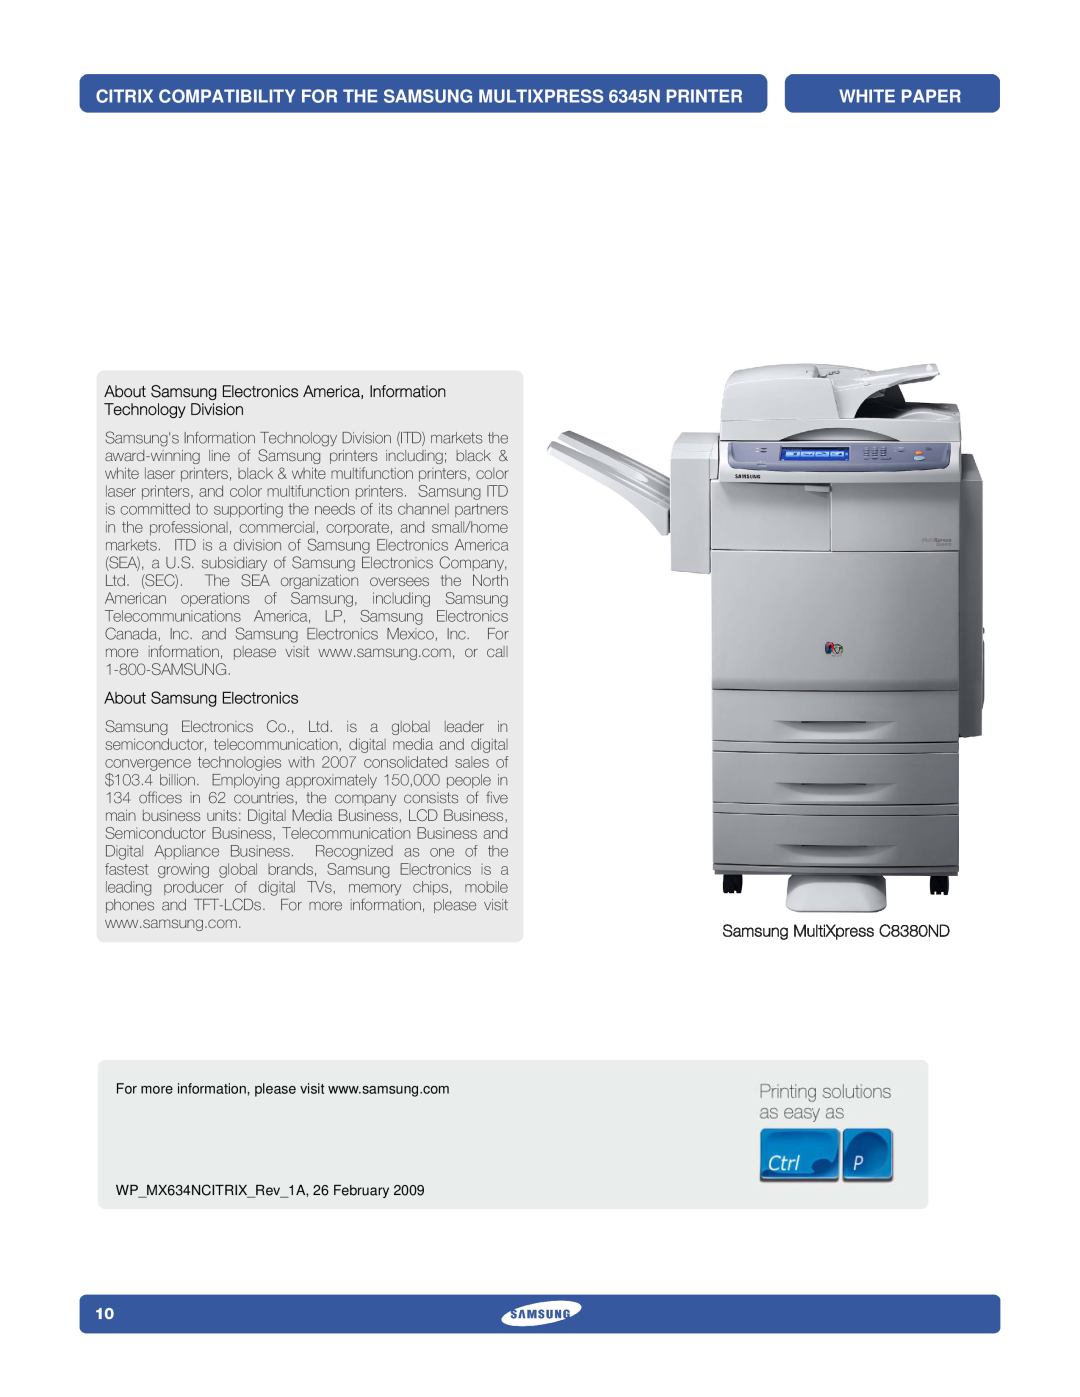 Samsung CITRIX COMPATIBILITY FOR THE SAMSUNG MULTIXPRESS 6345N PRINTER, White Paper, About Samsung Electronics 